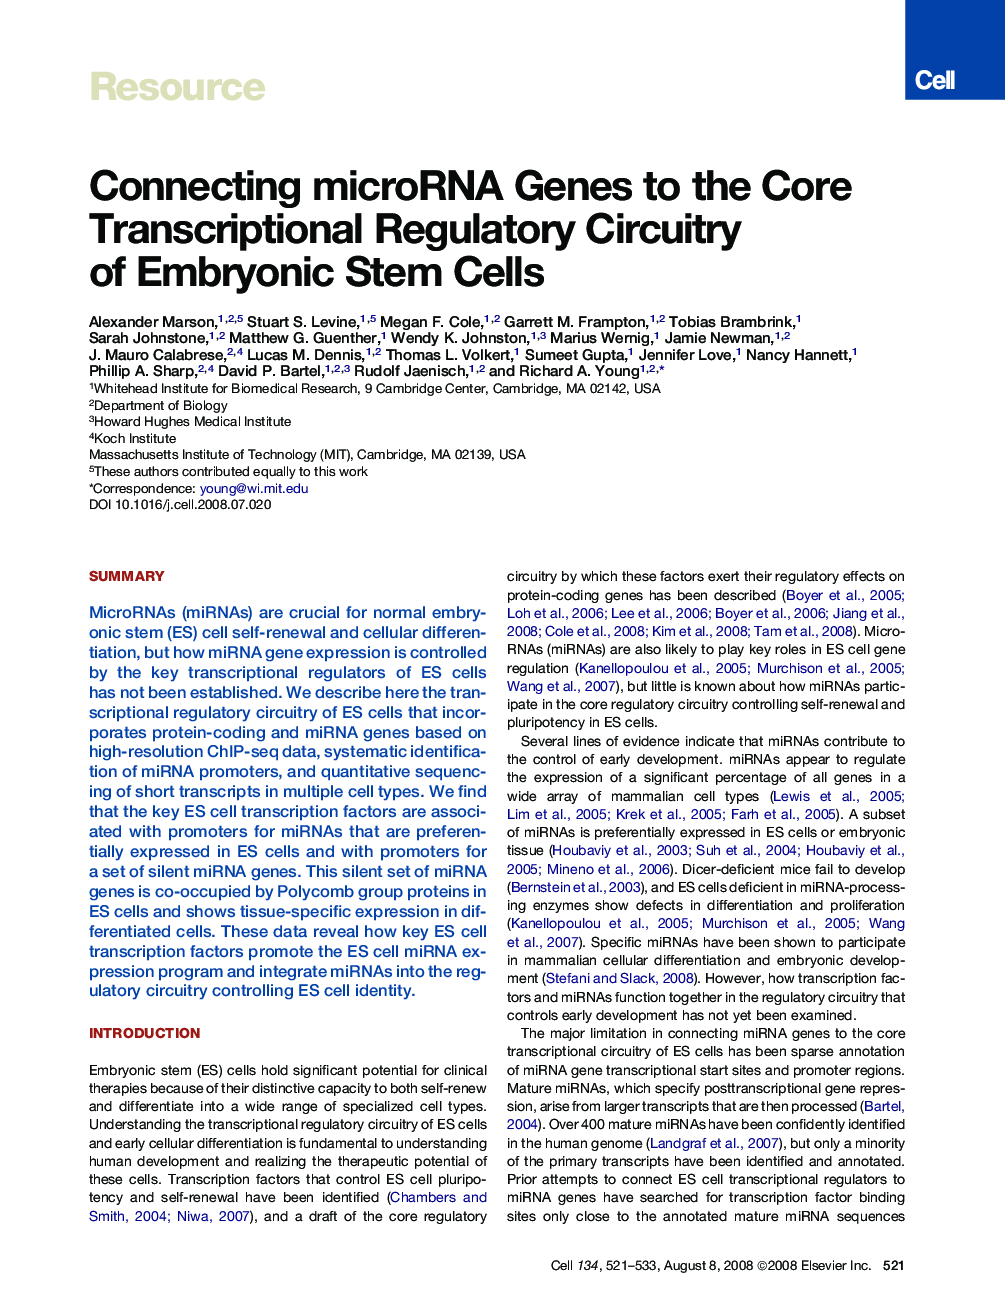 Connecting microRNA Genes to the Core Transcriptional Regulatory Circuitry of Embryonic Stem Cells